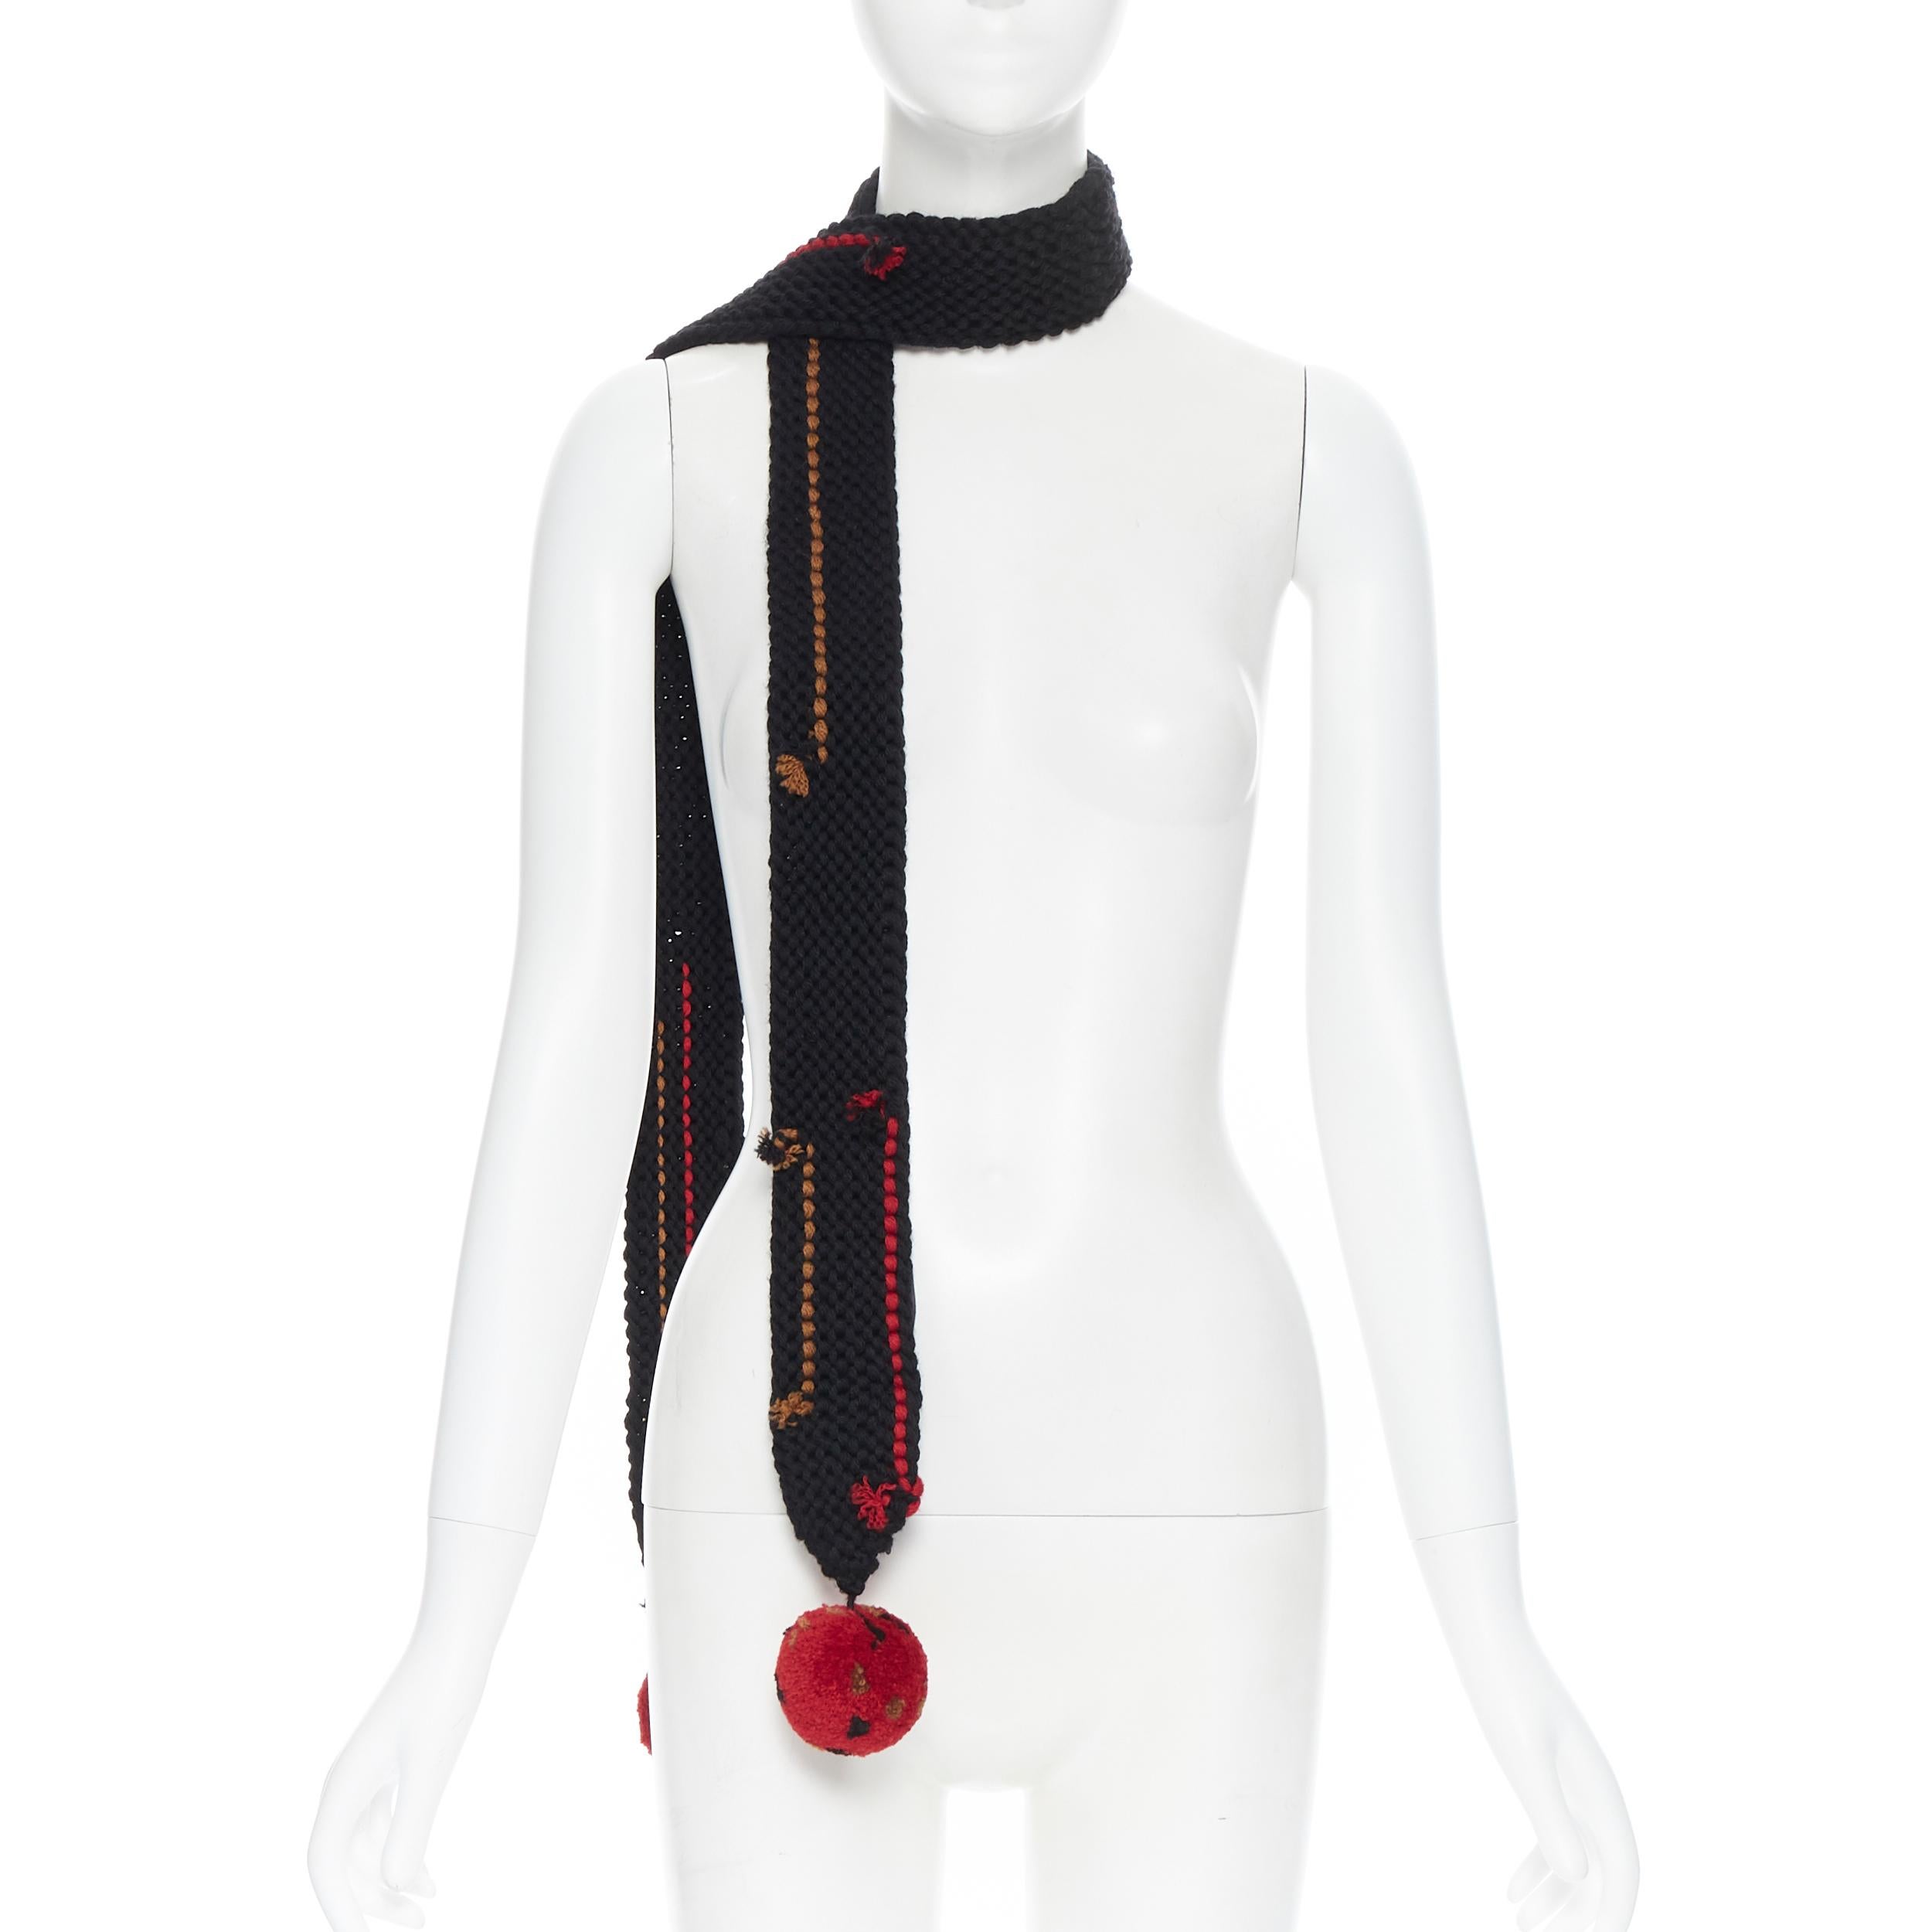 new PRADA 2017 Runway Hand Made black crochet knit pom trim skinny long scarf
Brand: Prada
Designer: Miuccia Prada
Collection: Fall Winter 2017
Model Name / Style: Knitted scarf
Material: Wool
Color: Black, red
Pattern: Solid
Extra Detail: From Fall